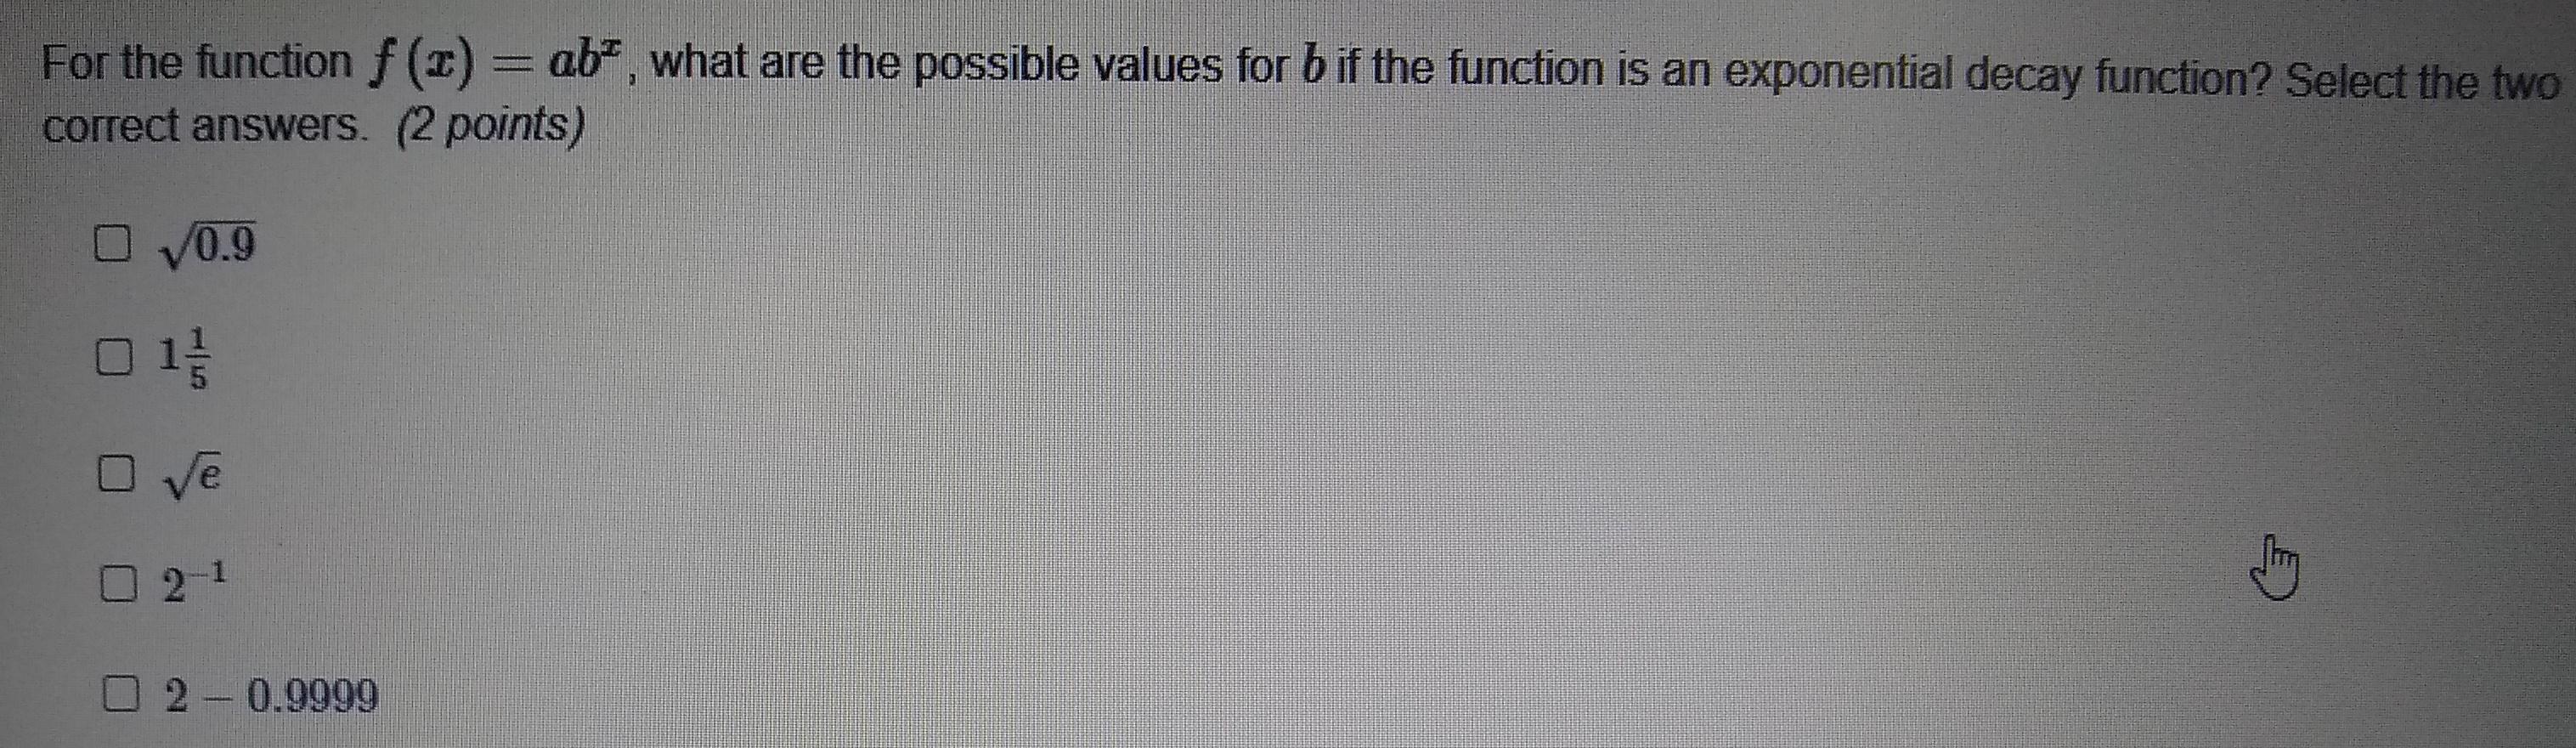 For The Function What Are The Possible Values For B If The Function Is An Exponential Decay Function